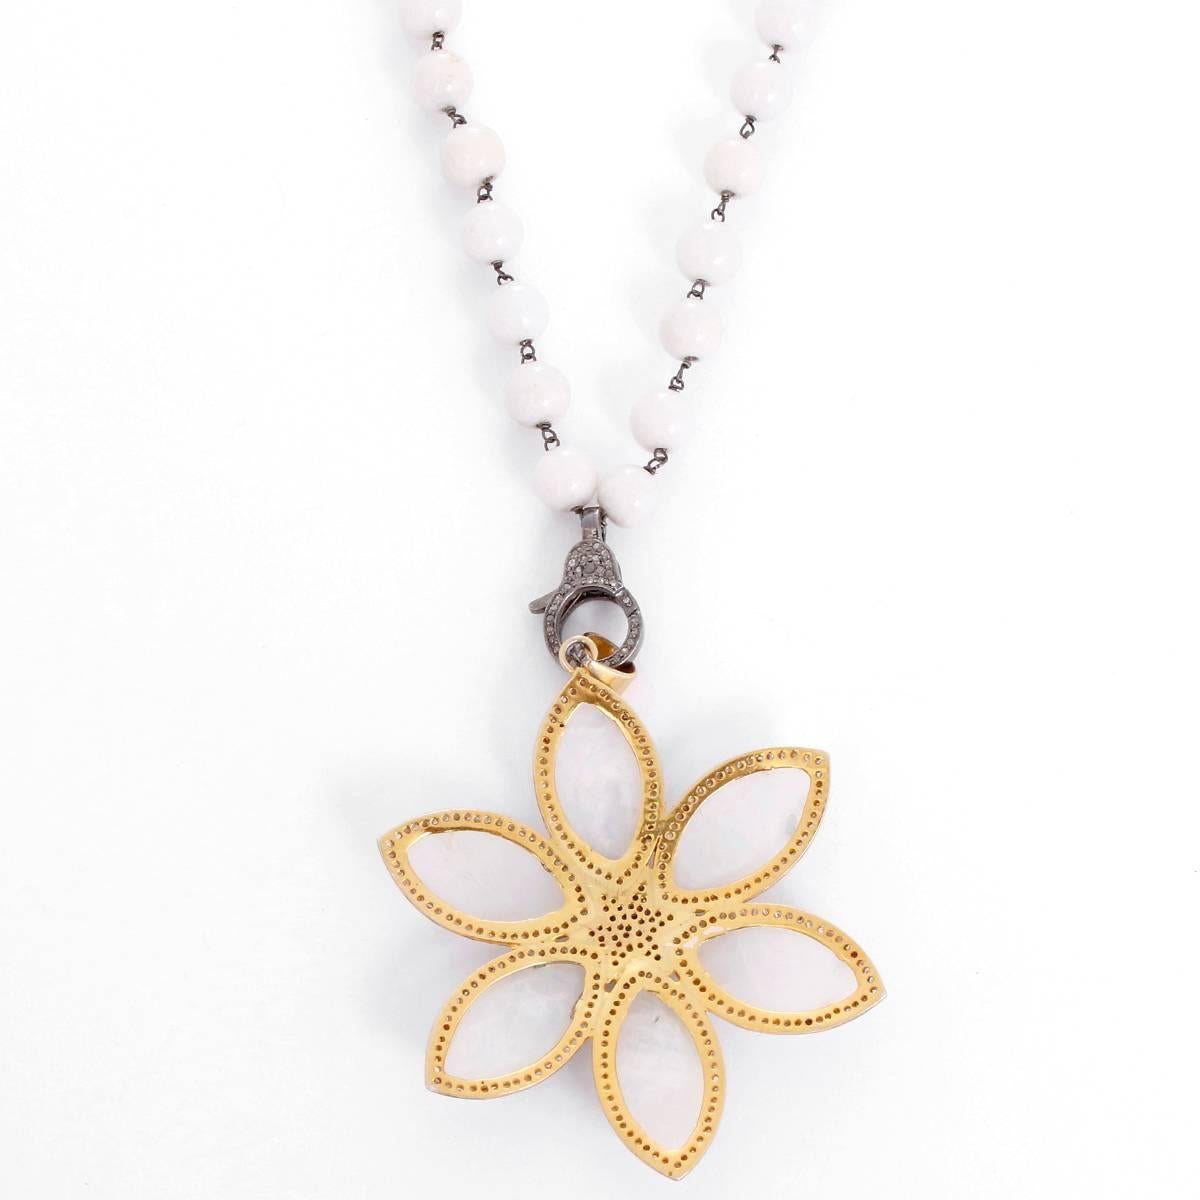  This amazing necklace features a starburst pendant with moonstone and 2.2 carats of diamonds set in silver plated gold with a diamond clasp in oxidized silver on a white agate bead chain. Pendant including clasp measures apx. 3-1/2 inches in length